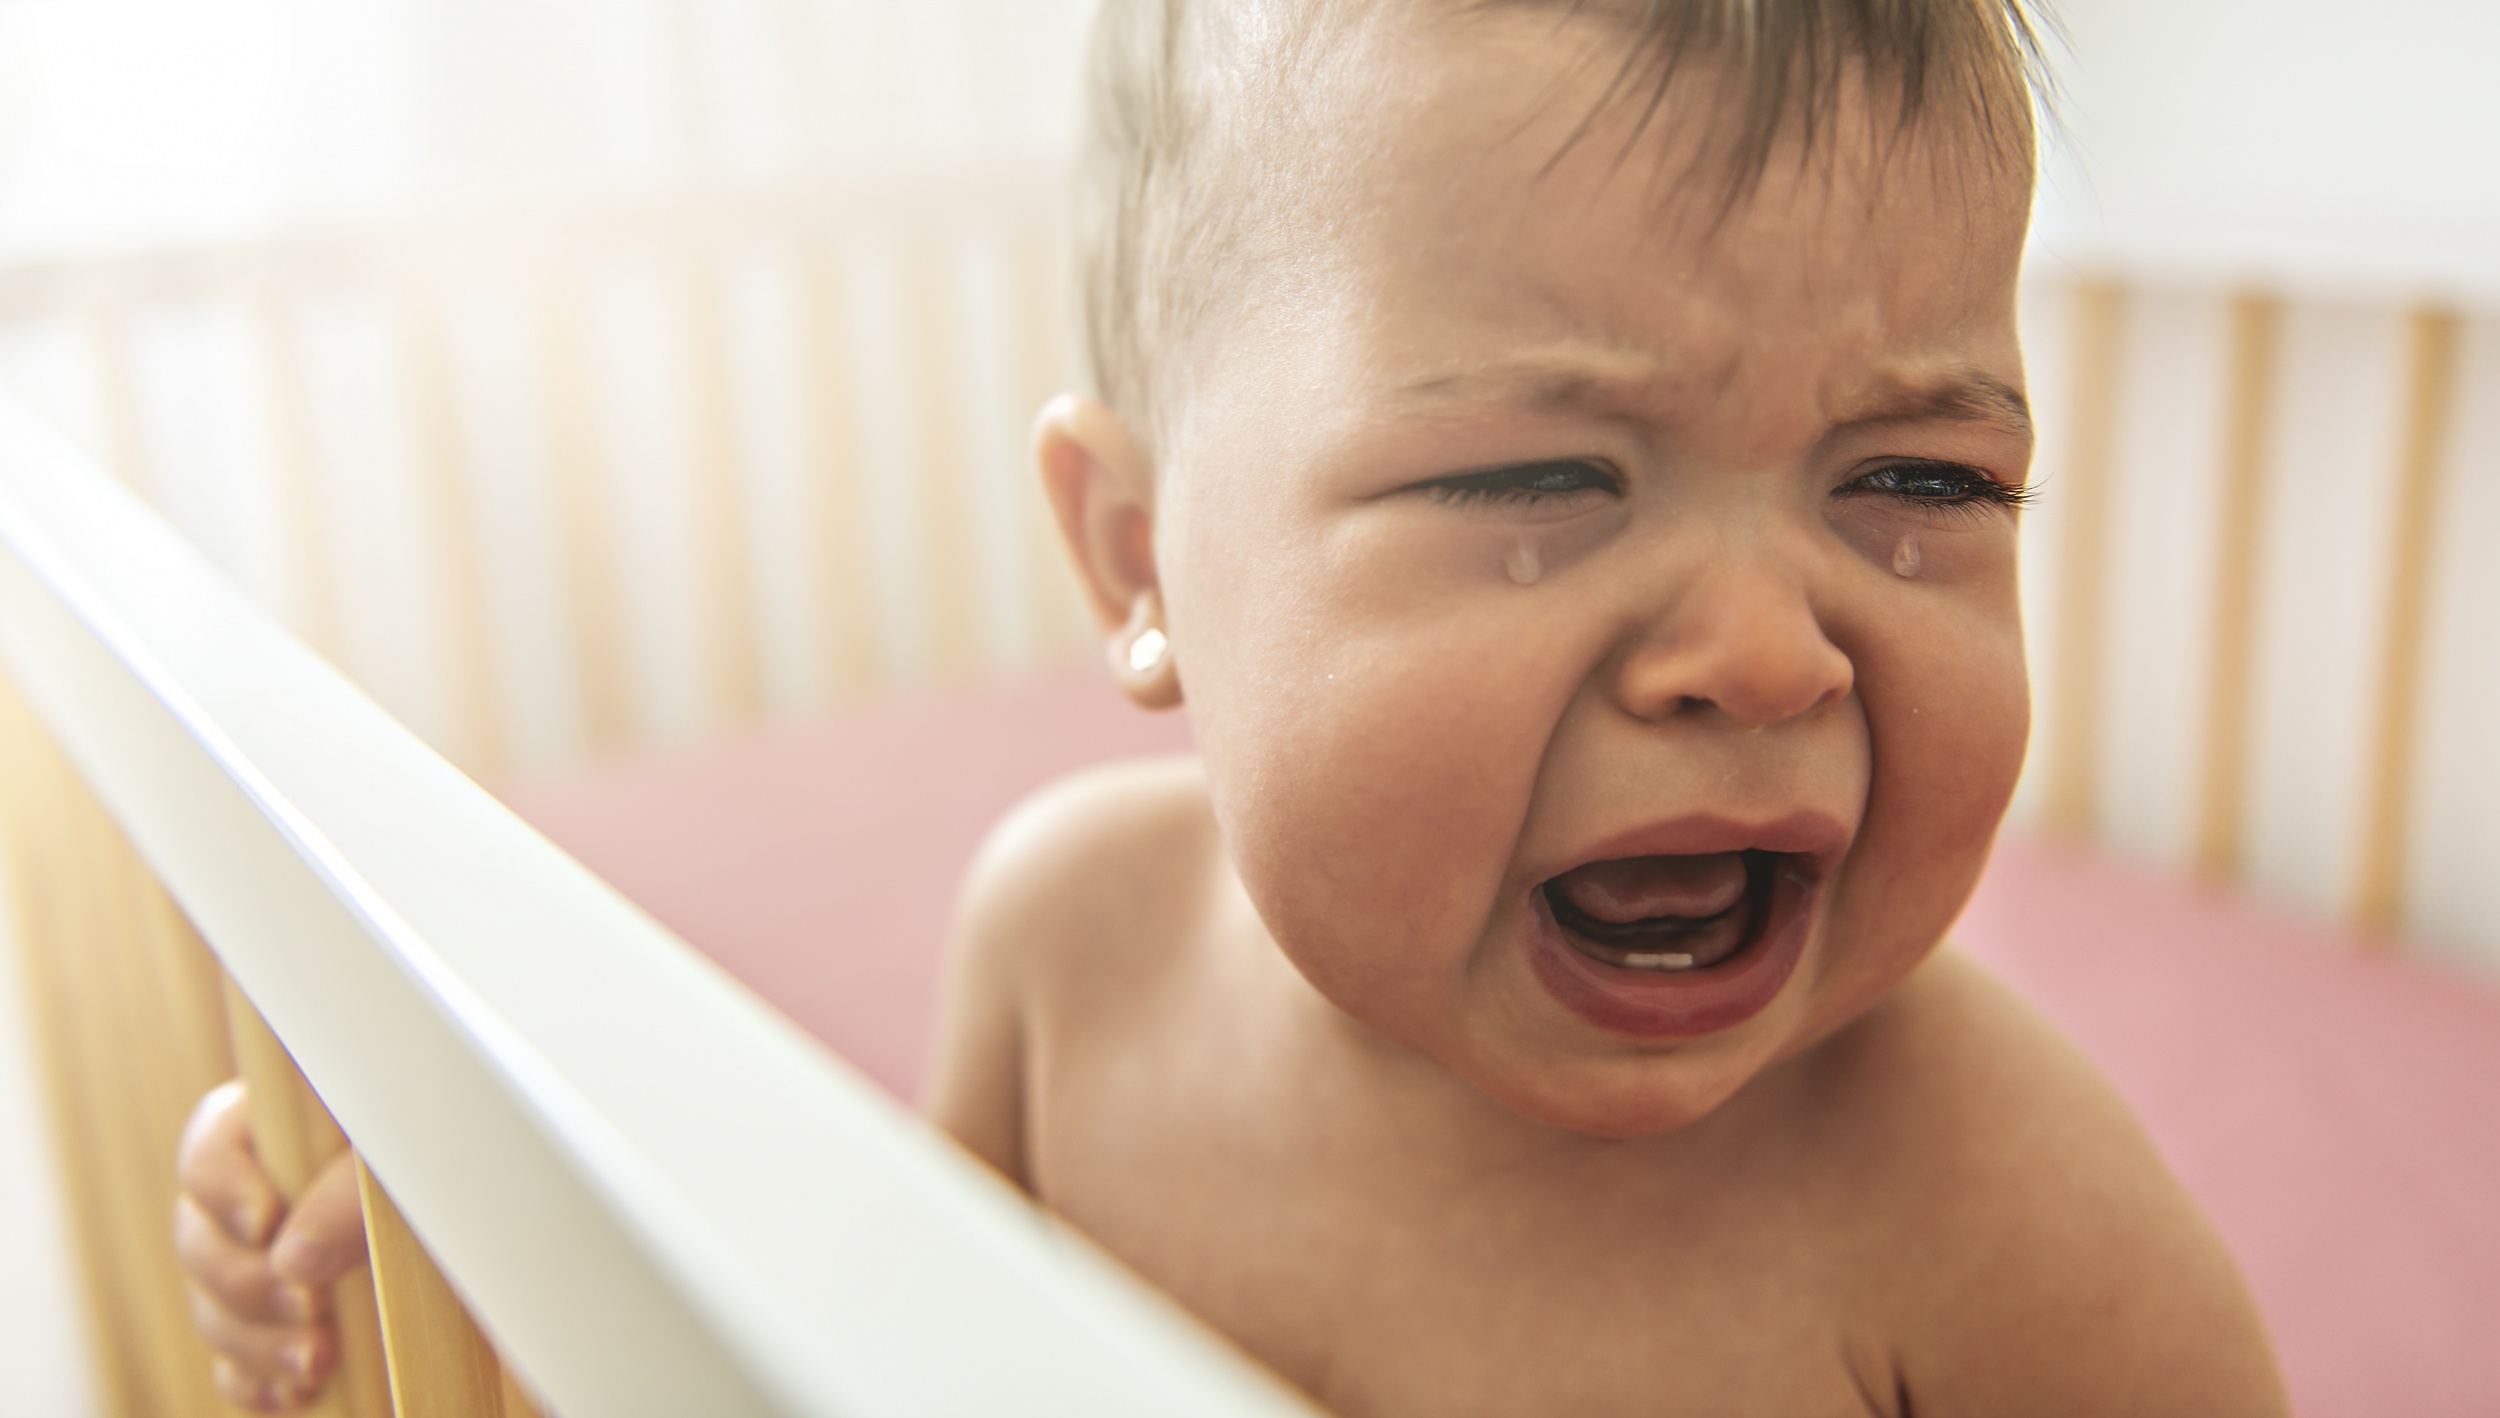 A New Study Suggests It’s Okay to Leave Your Babies Crying, and Here’s Why